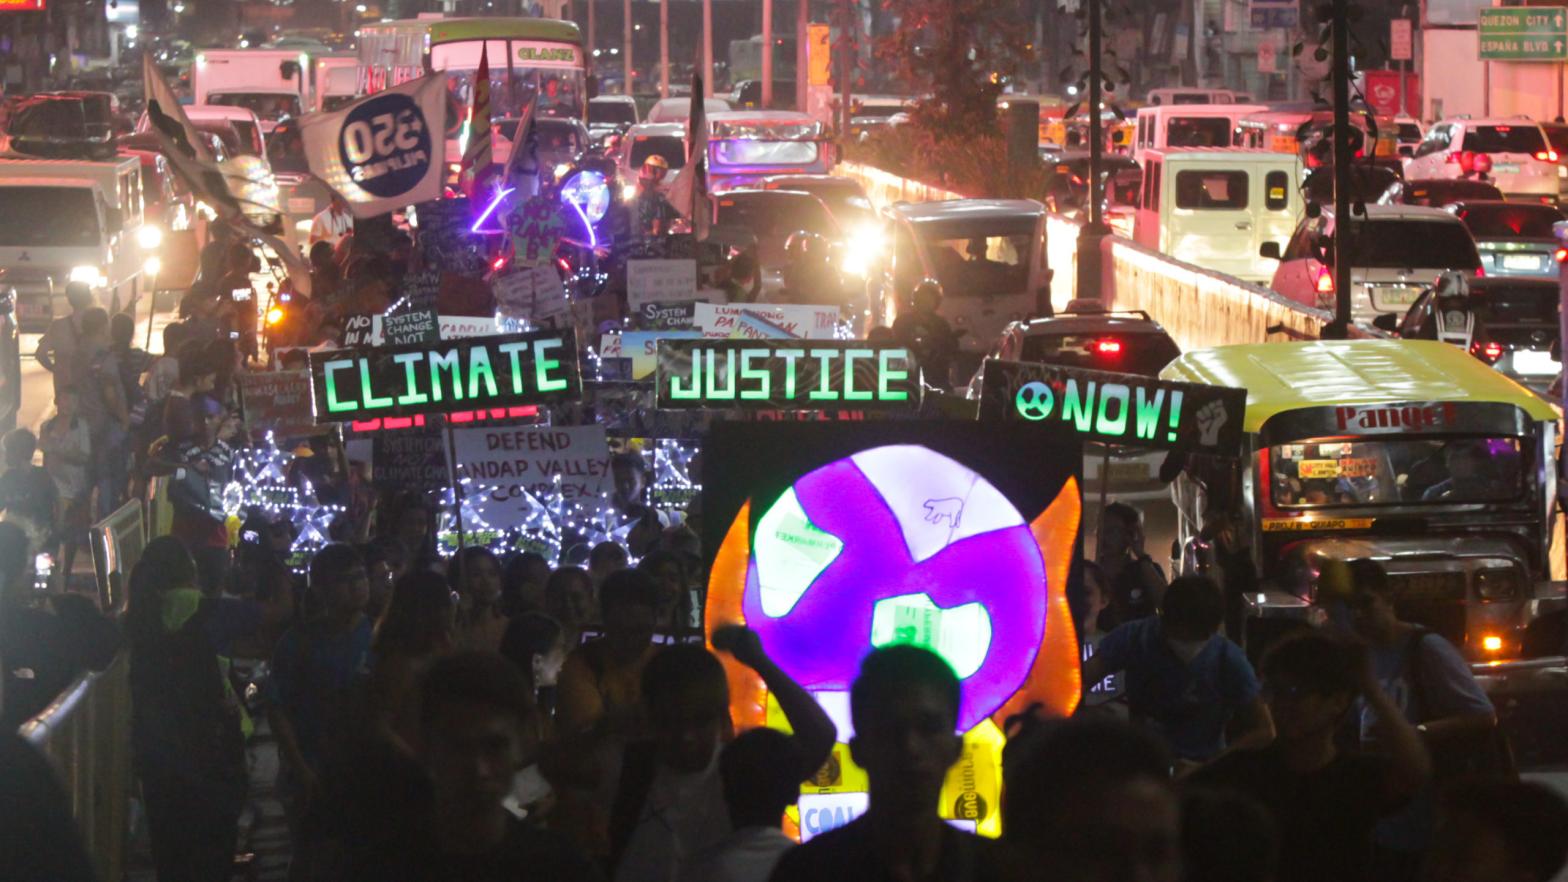 Philippine activists take part in a rally calling for action against climate change in Manila on November 29, 2019. (Photo: Dante Diosina Jr./AFP, Getty Images)